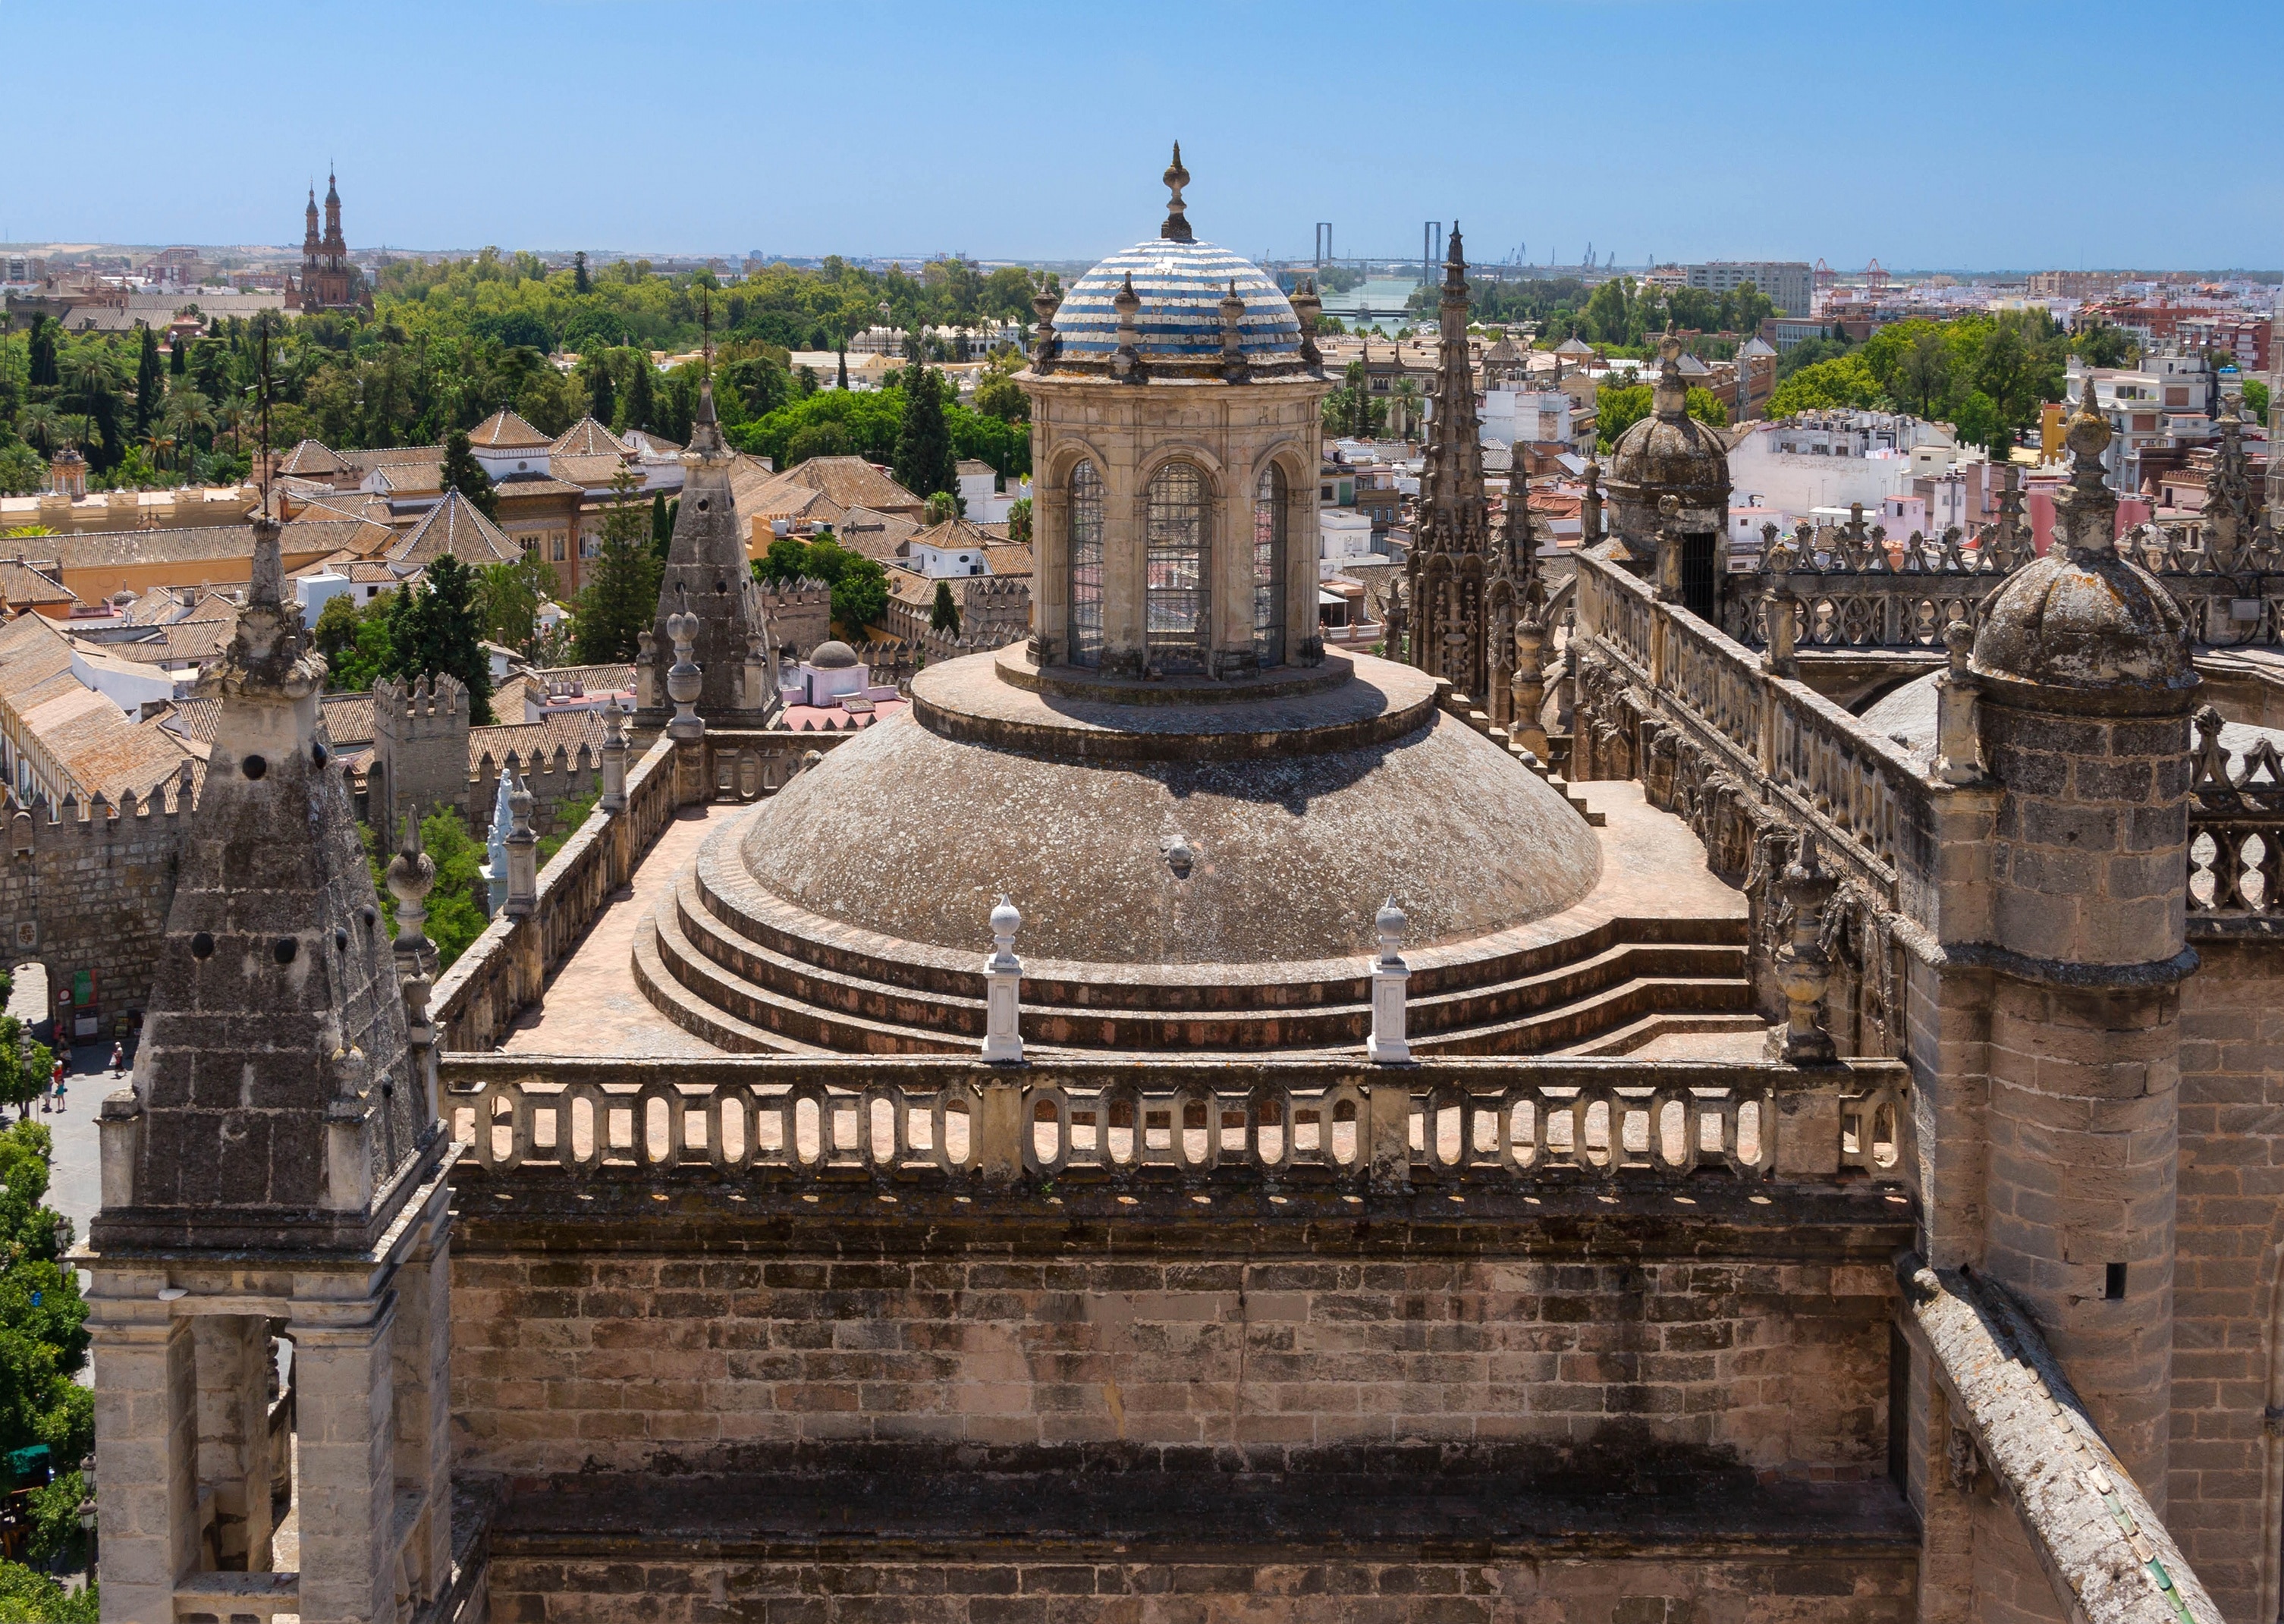 A pinnacle, seen from the "Giralda", cathedral of Seville, Spain.